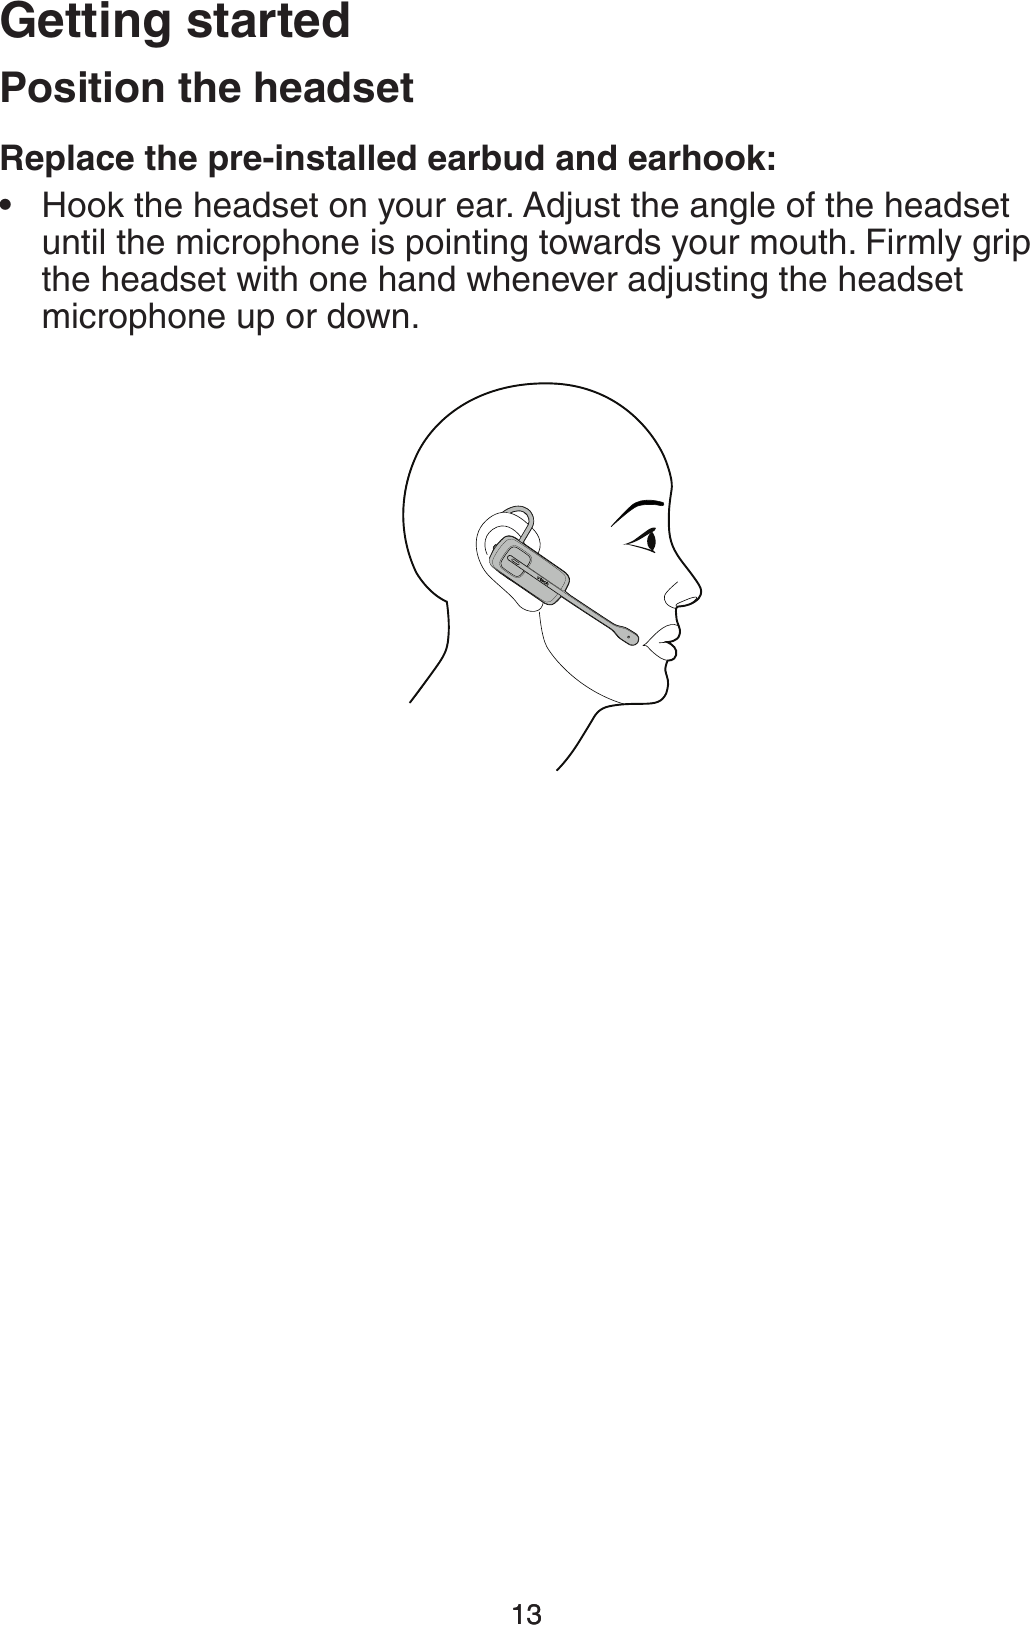 1313(FUUJOHTUBSUFE3FQMBDFUIFQSFJOTUBMMFEFBSCVEBOEFBSIPPLHook the headset on your ear. Adjust the angle of the headset until the microphone is pointing towards your mouth. Firmly grip the headset with one hand whenever adjusting the headset microphone up or down.•1PTJUJPOUIFIFBETFU